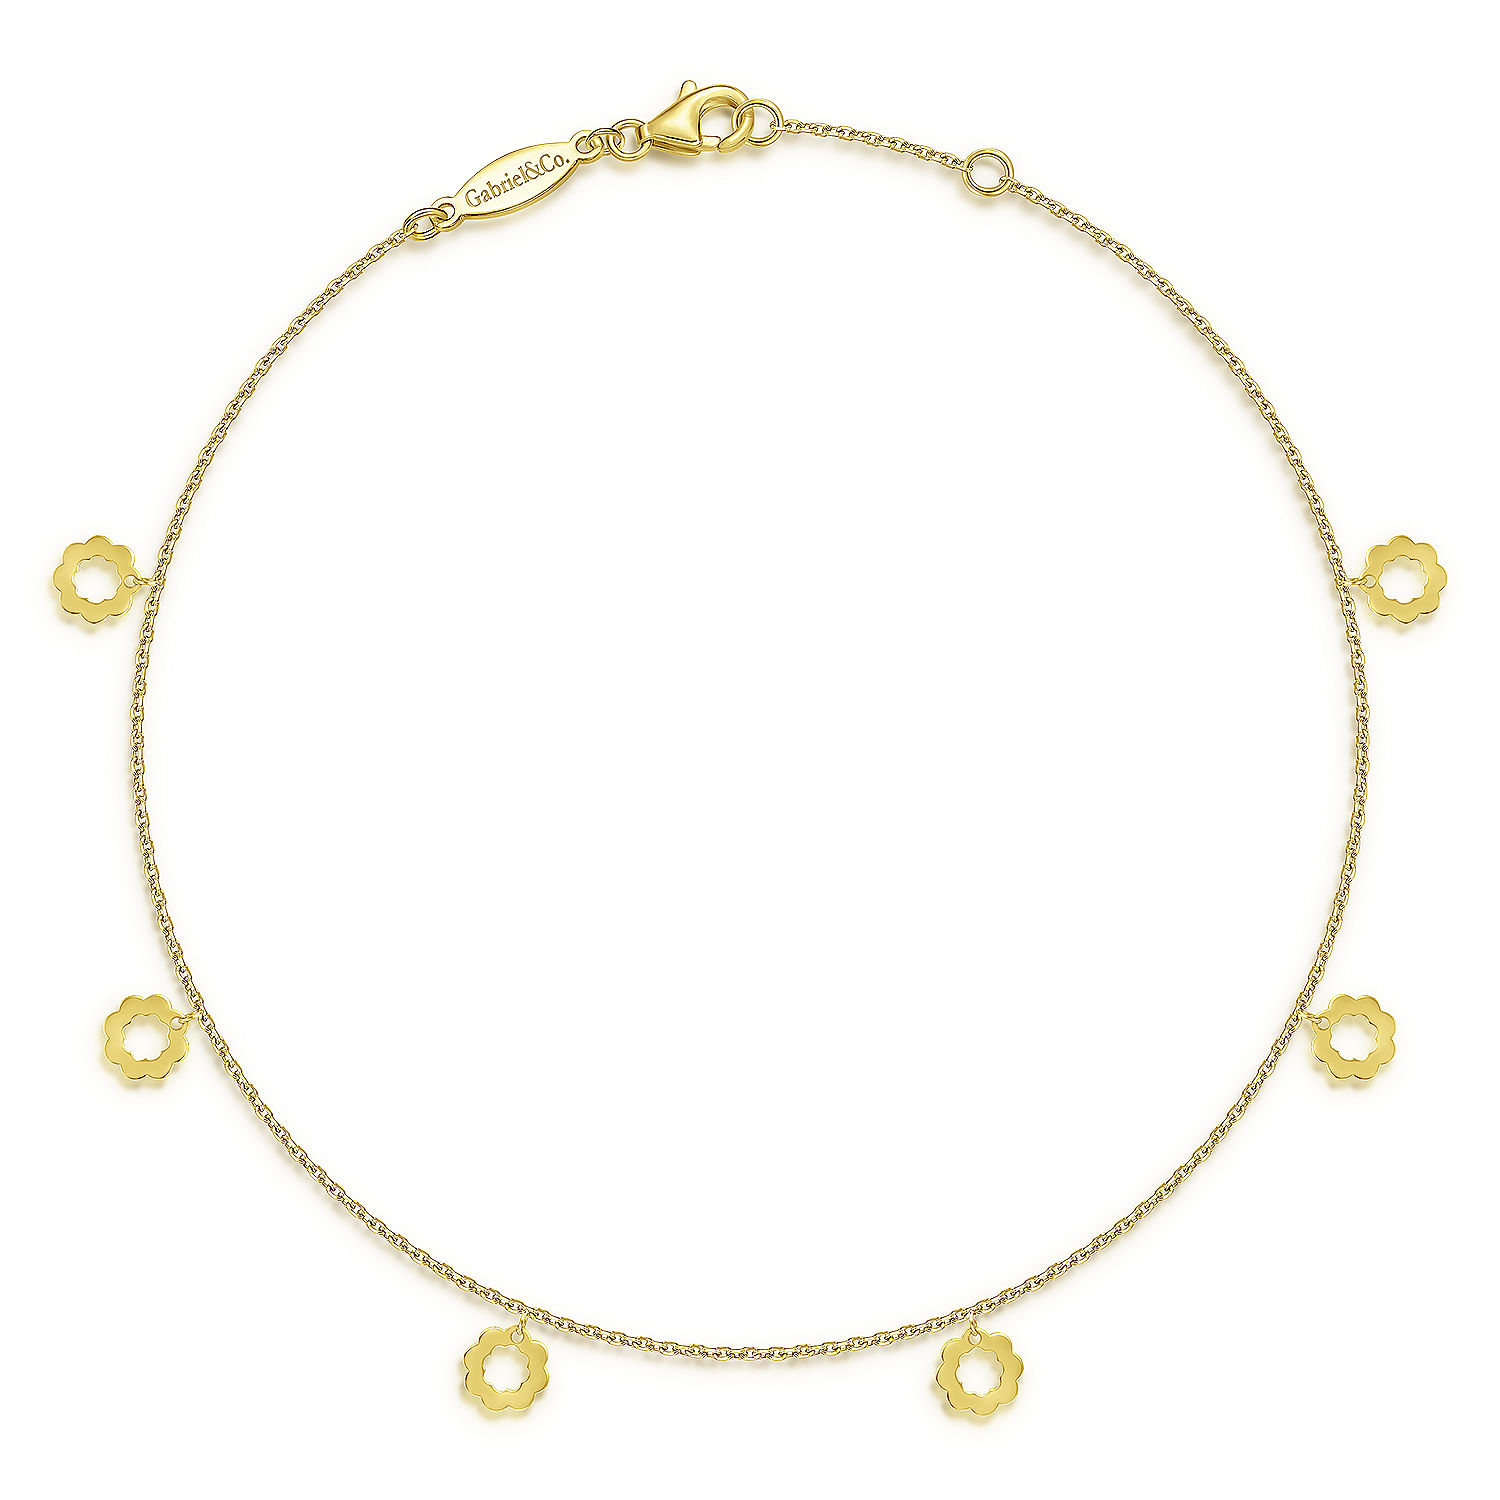 14K Yellow Gold Chain Ankle Bracelet with Open Flower Charm Drops